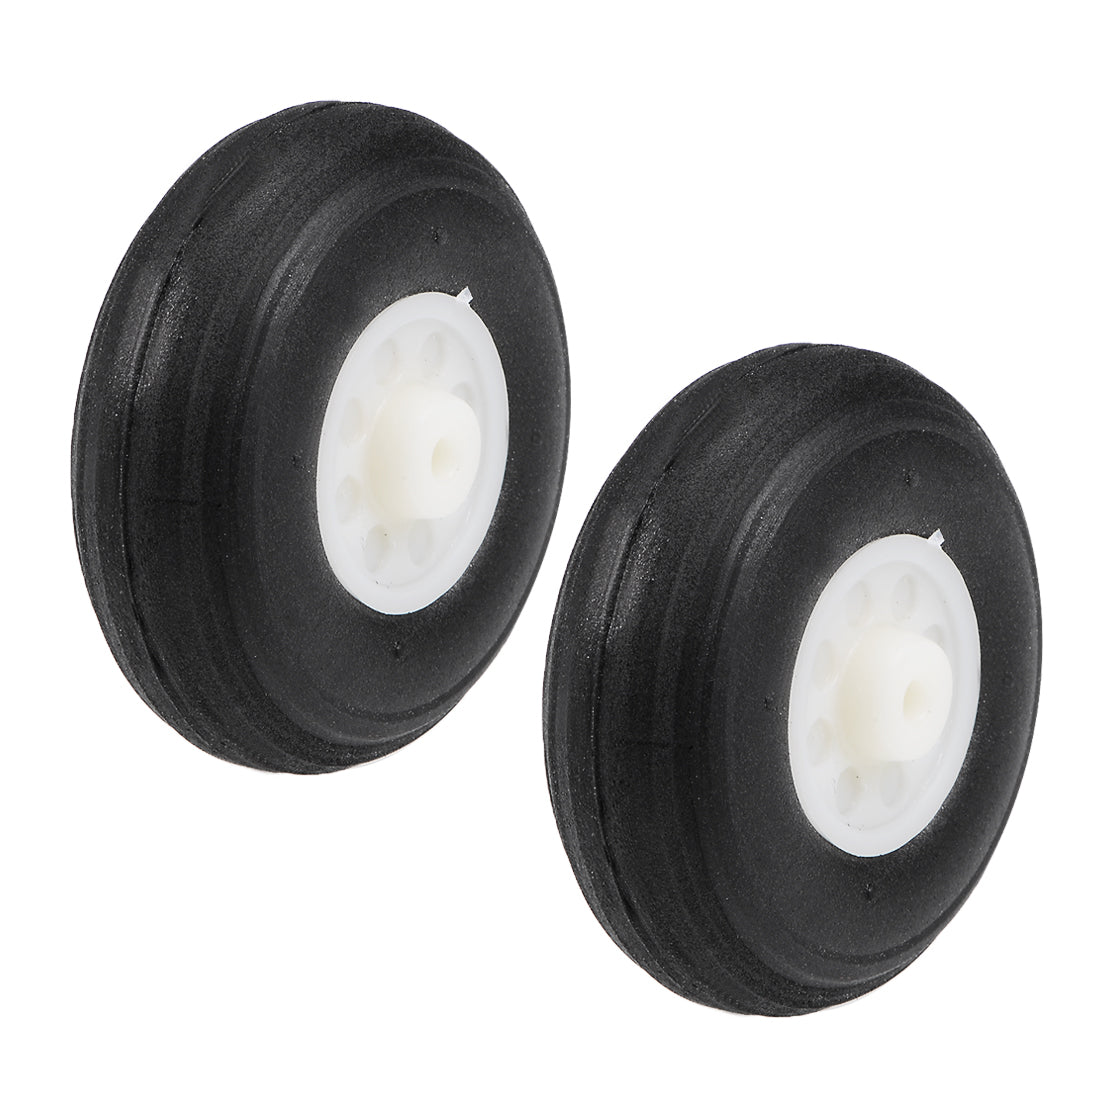 uxcell Uxcell Tire and Wheel Sets for RC Airplane,PU Sponge Tire with Plastic Hub,1.43" 2pcs